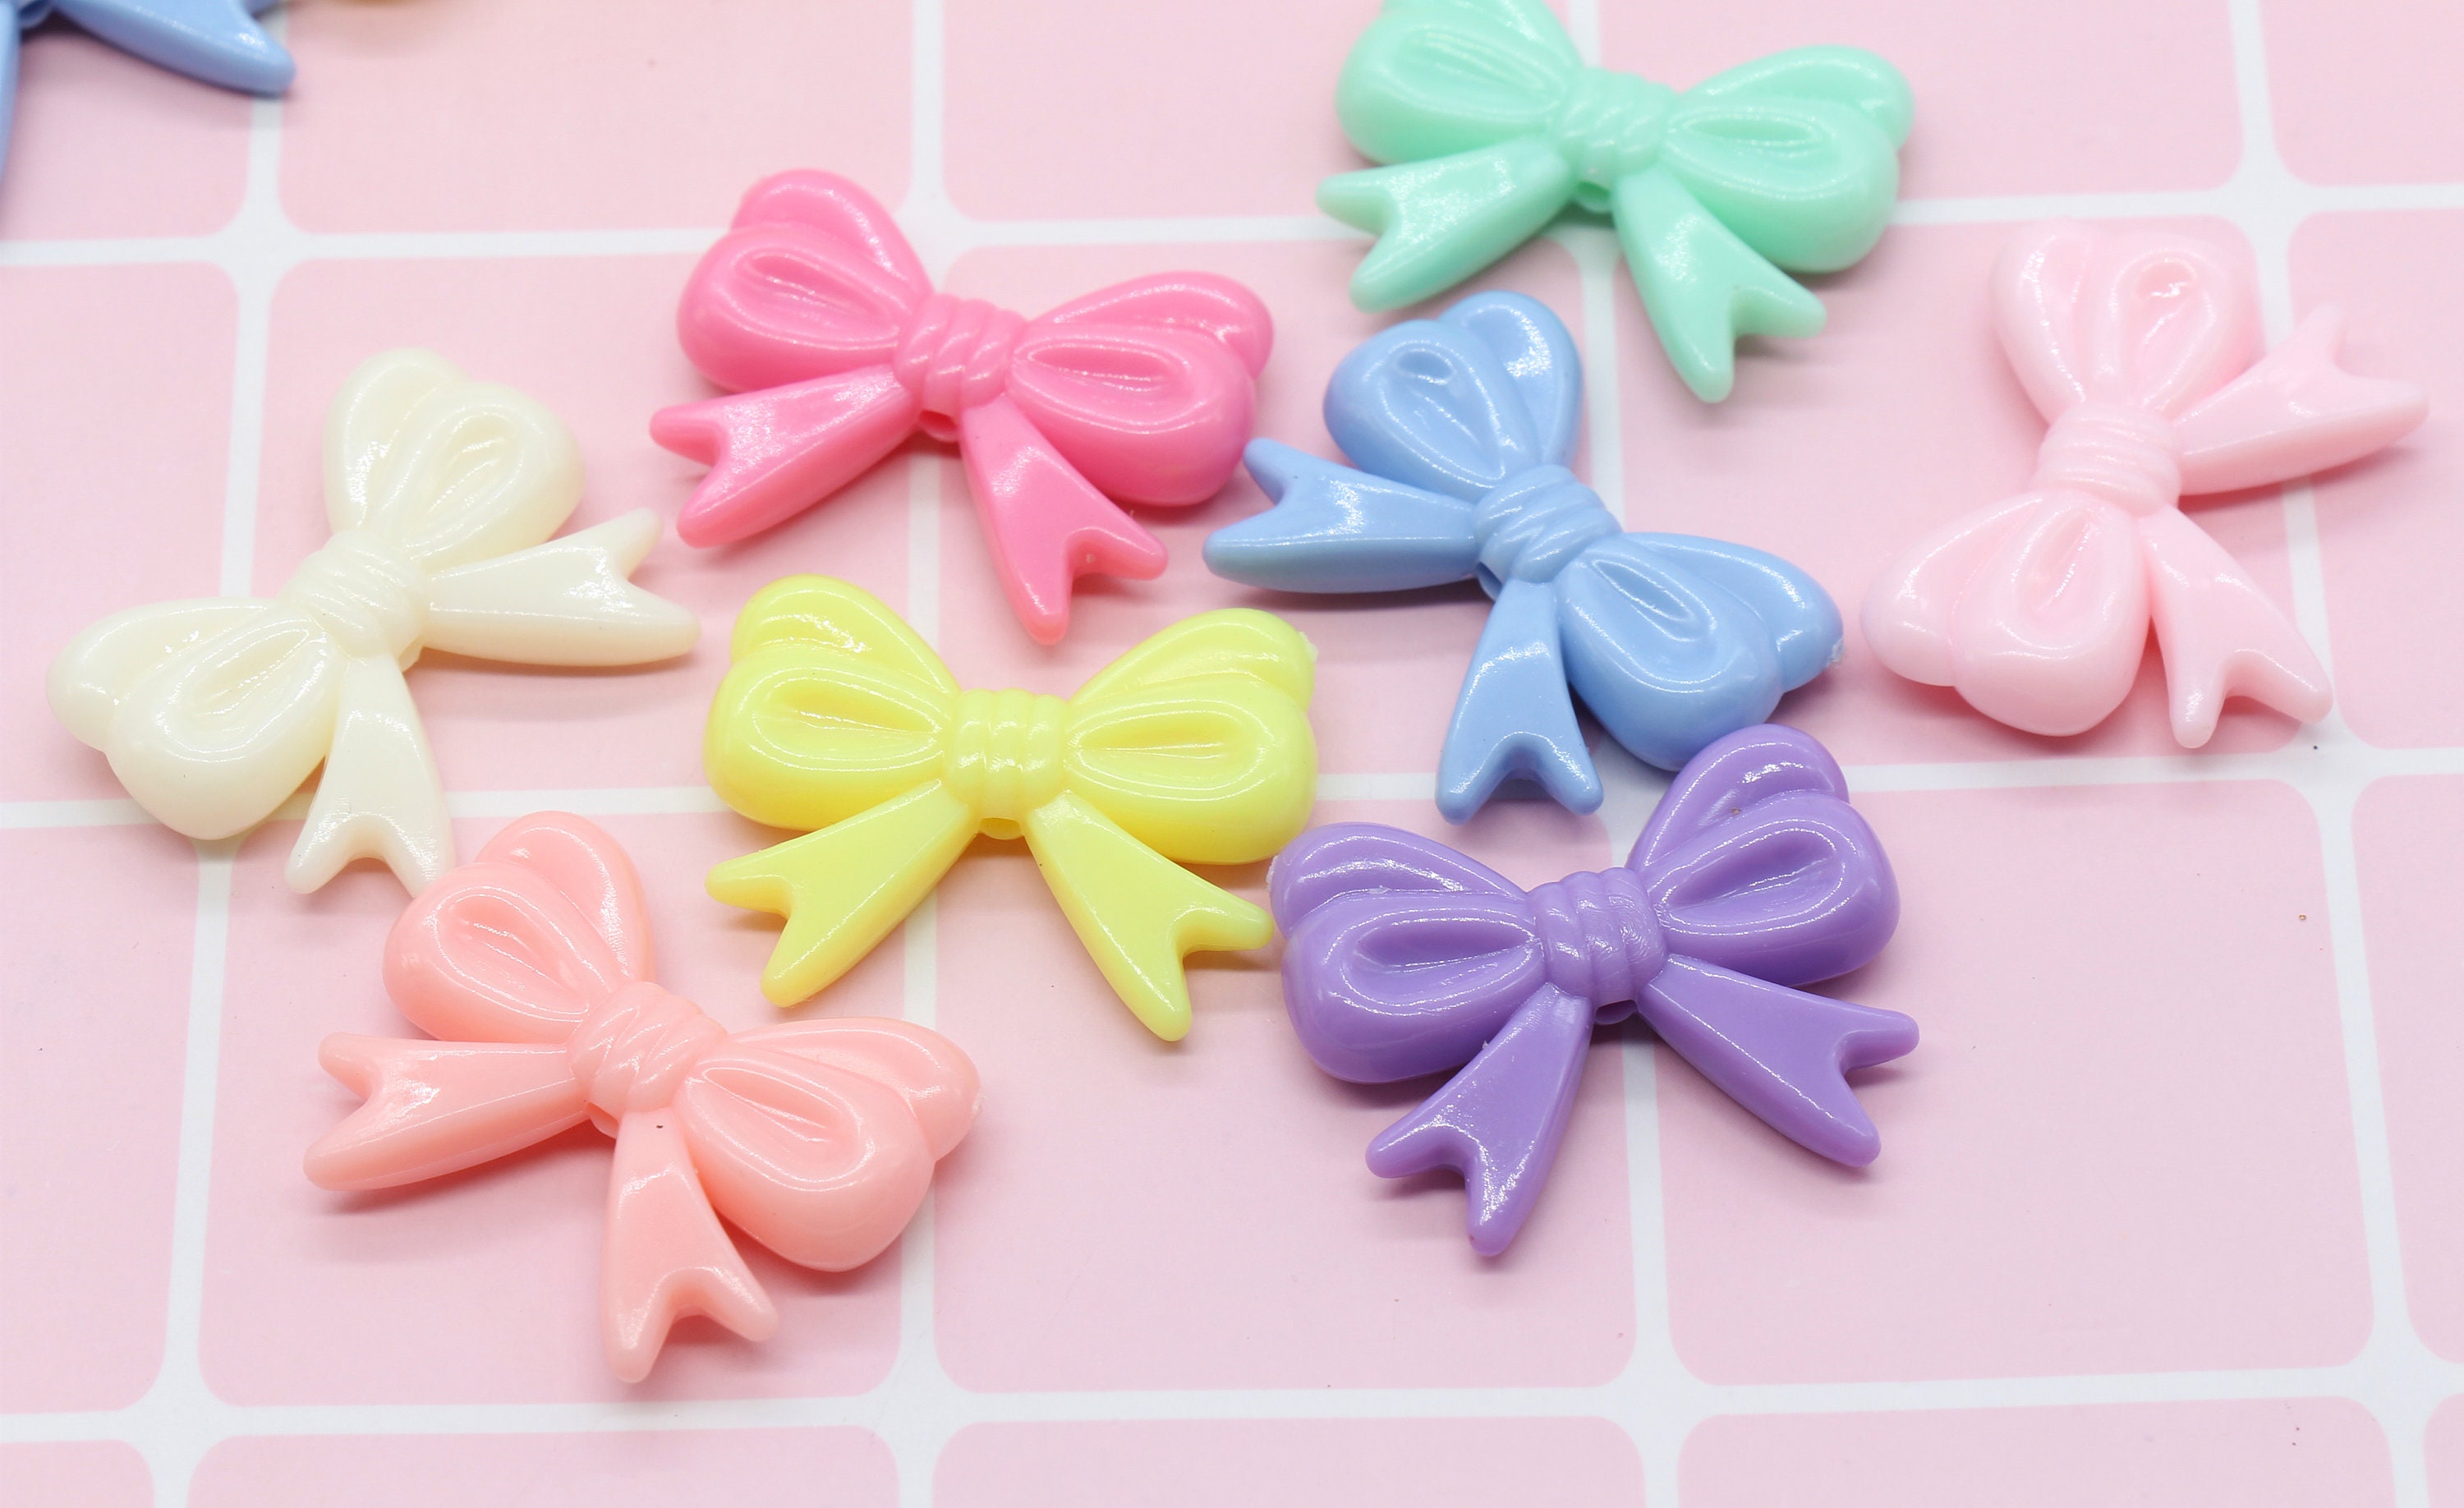  20 Beads Multicolor Bow Jet Beads, Acrylic Ribbon Bow Beads,  Pastel Bow Beads, Mixed Colors Plastic Beads : Home & Kitchen